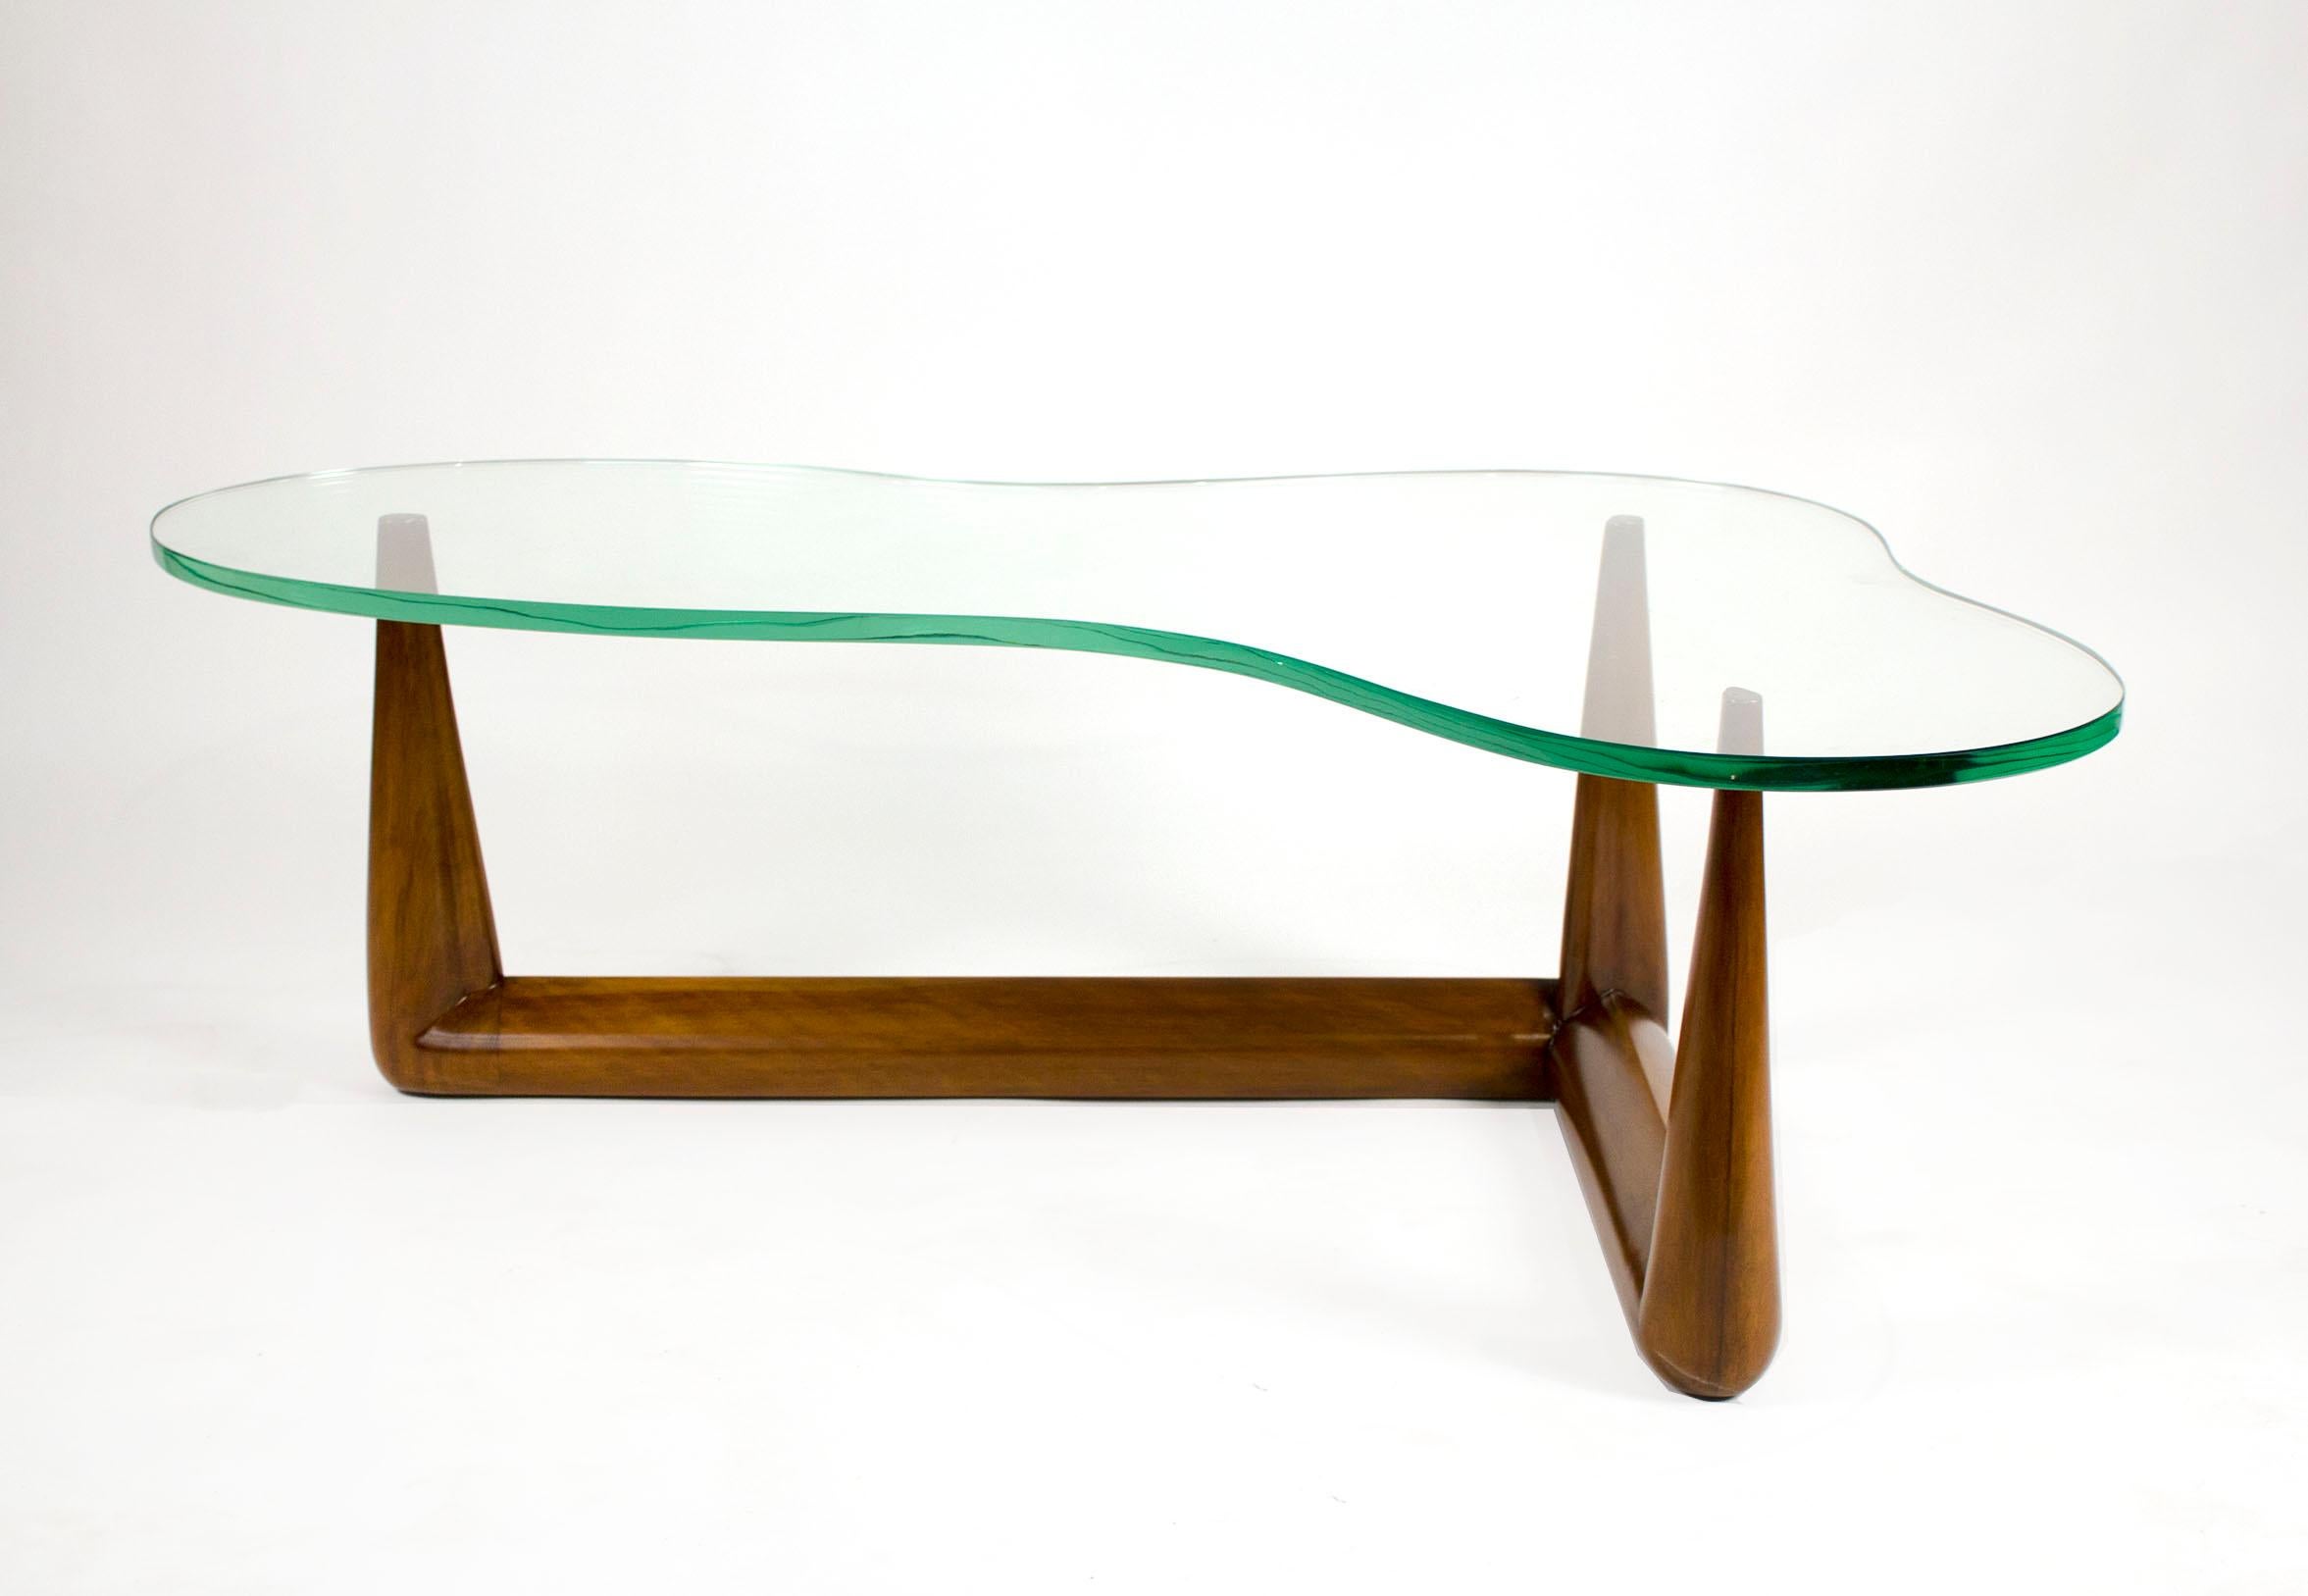 T.H. Robsjohn-Gibbings Biomorphic Cocktail Table w Interesting Anecdote of Isamu Noguchi.

Widdicomb cocktail table with architectural grade green edge biomorphic glass top and solid carved maple sculptural base. 

If you have not read the story of